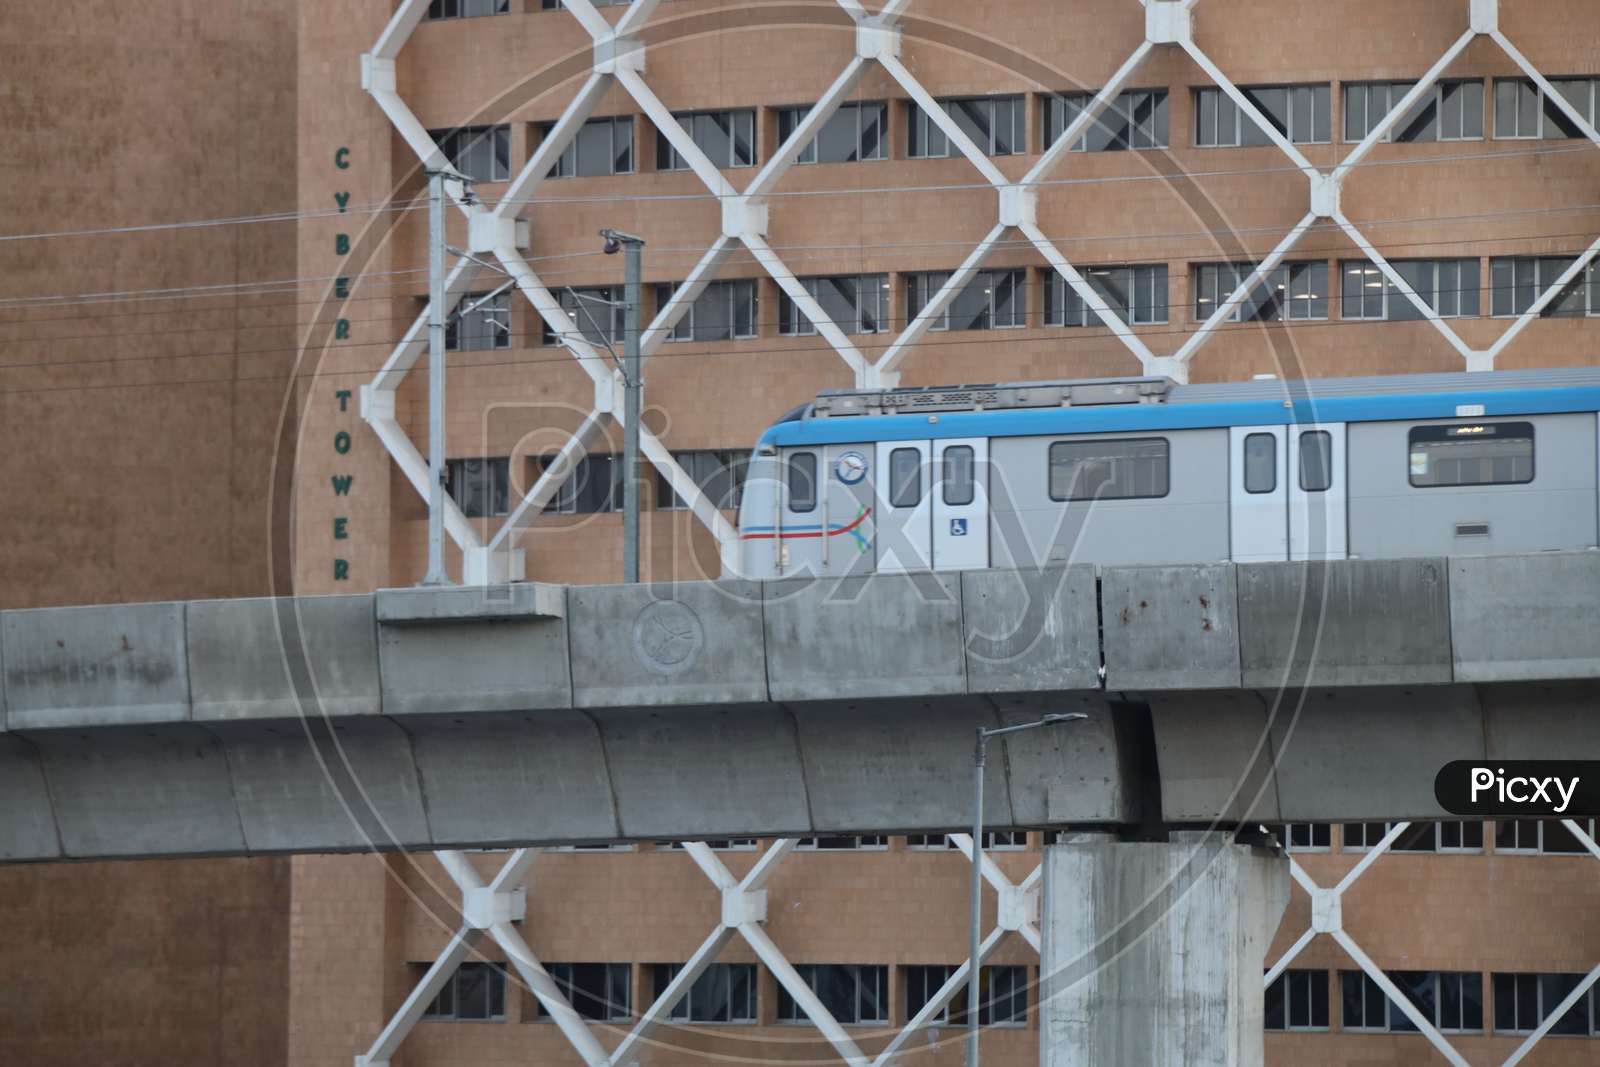 Hyderabad Metro Train Running on Track Line With Cyber Towers in Background